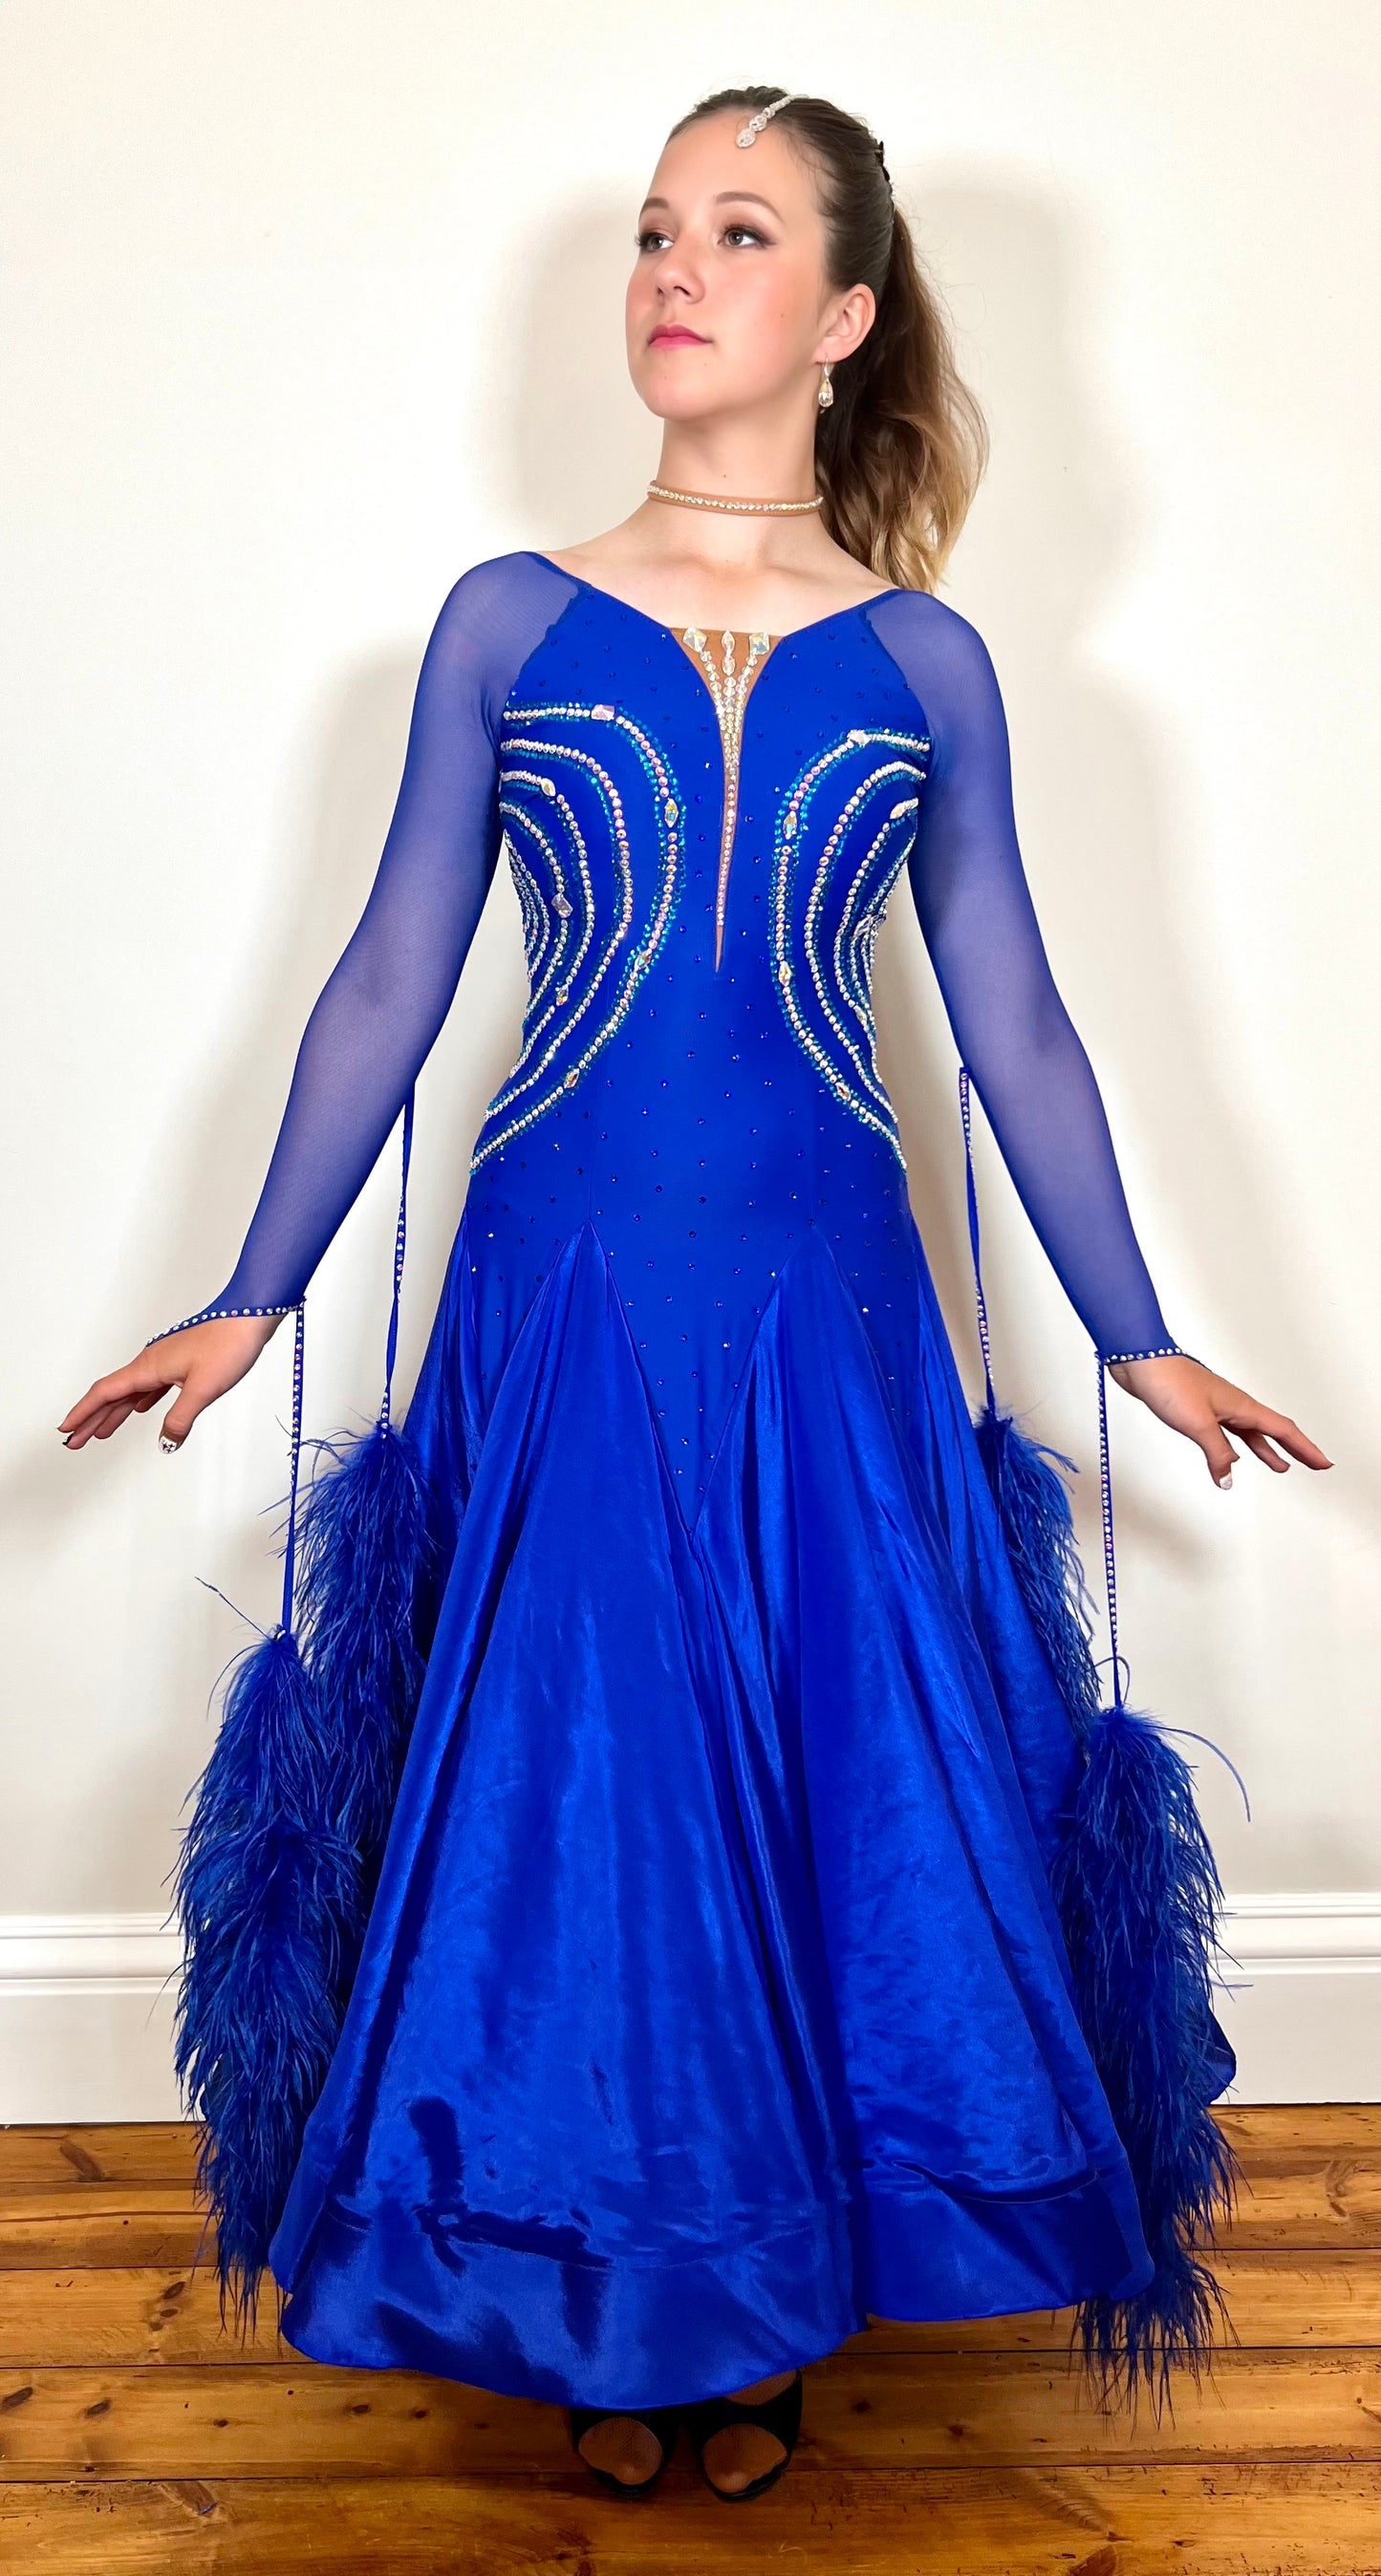 009 Bright Royal Blue Ballroom Dress. Blue & AB stoning detail with material stoned & ostrich feather floats